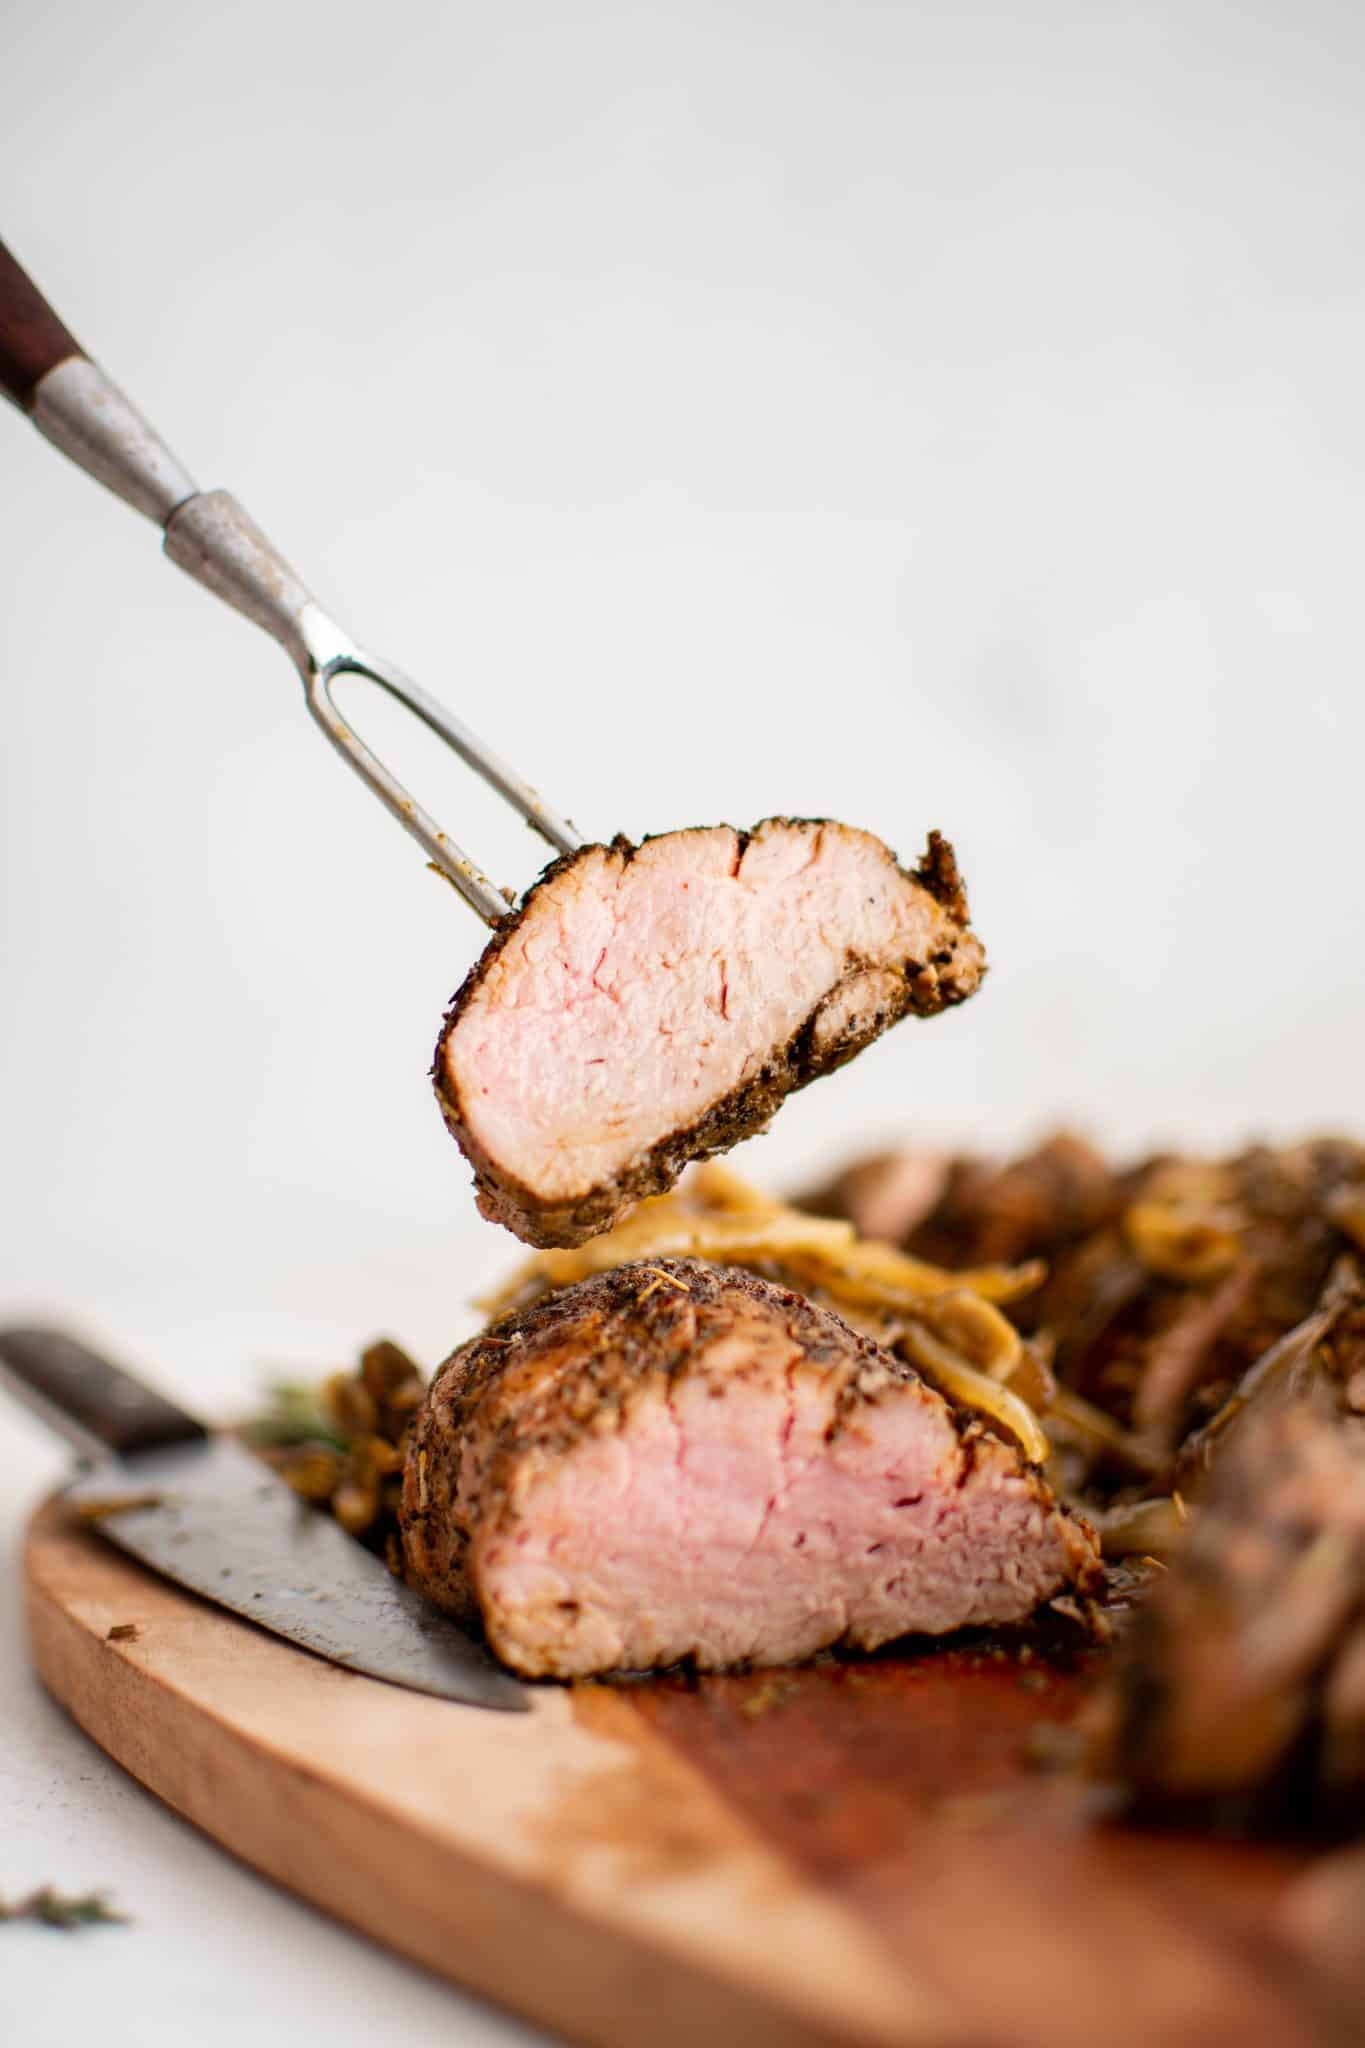 Meat fork holding a single pork medallion showing its juicy interior and herb seasoned exterior.